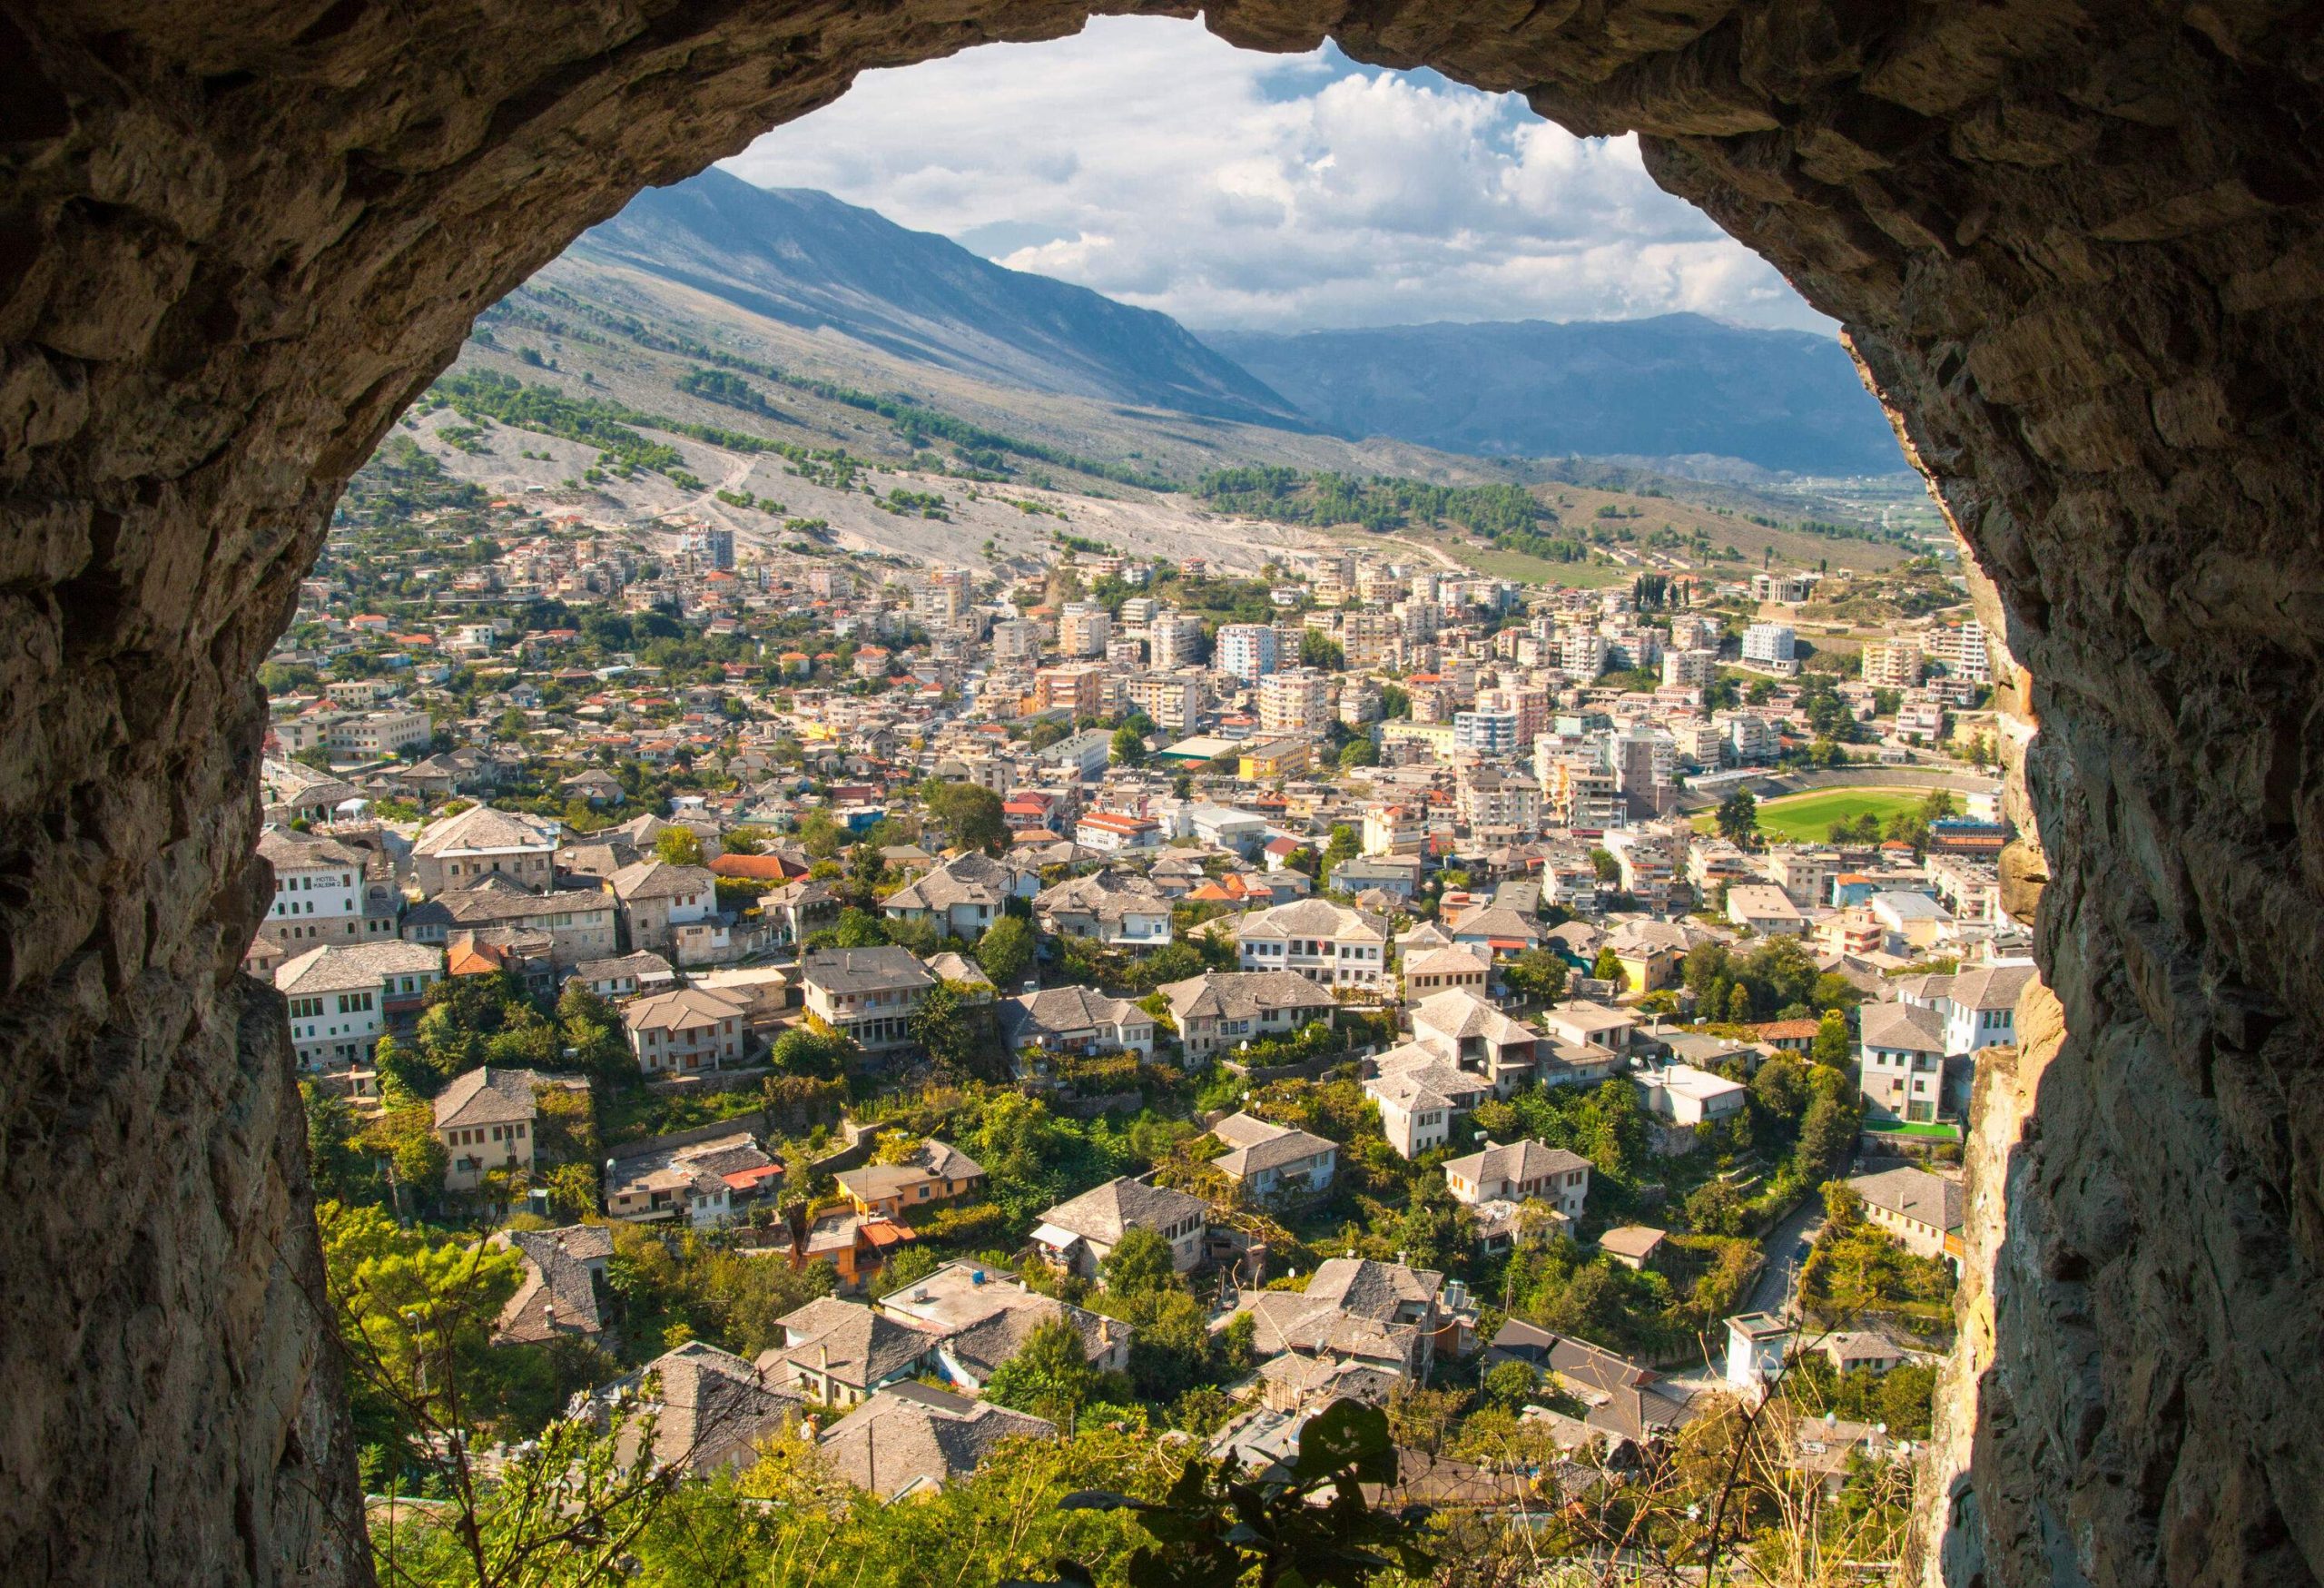 The cityscape sloping at the base of the surrounding mountains viewed from a stone arch.